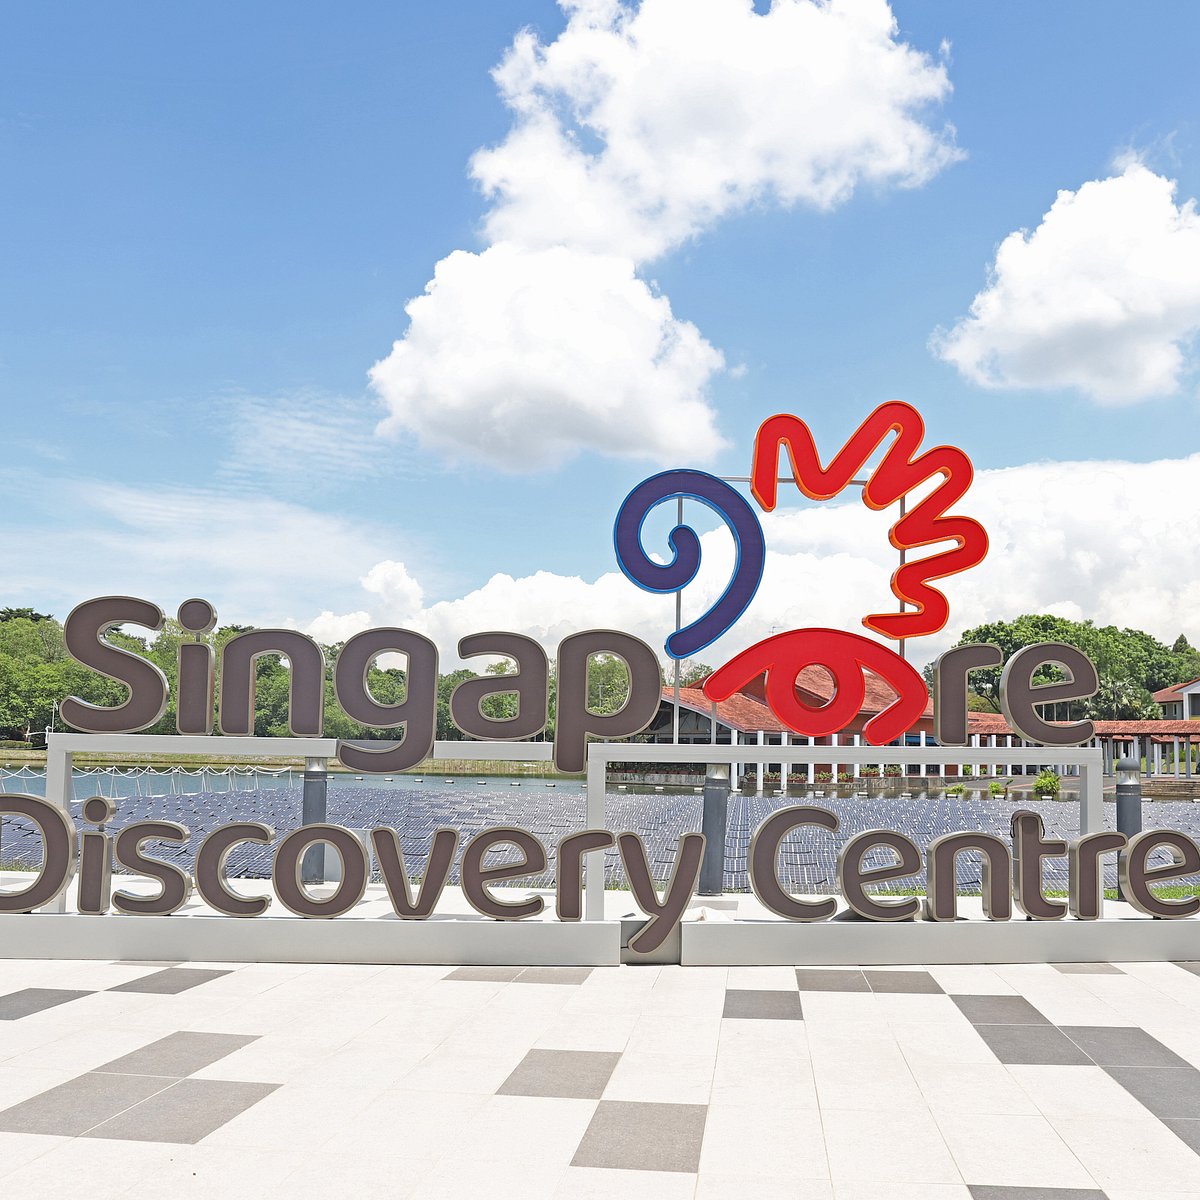 Singapore Discovery Centre. Singapore Discovery Centre Jurong West. Дискавери центр